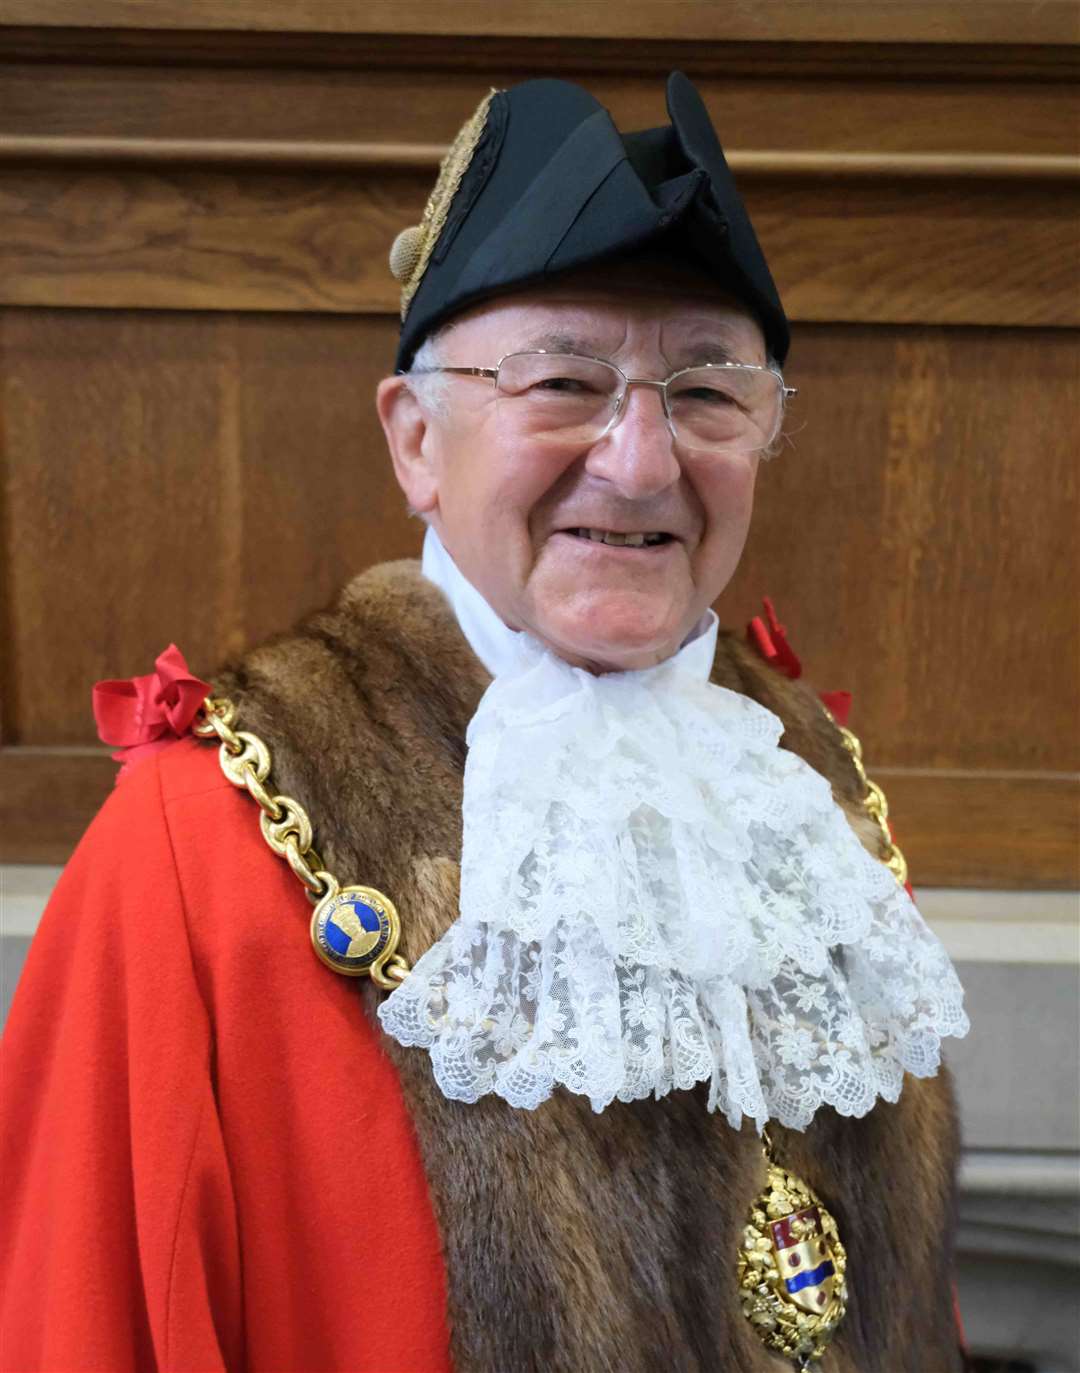 The Mayor of Maidstone lives next to the development